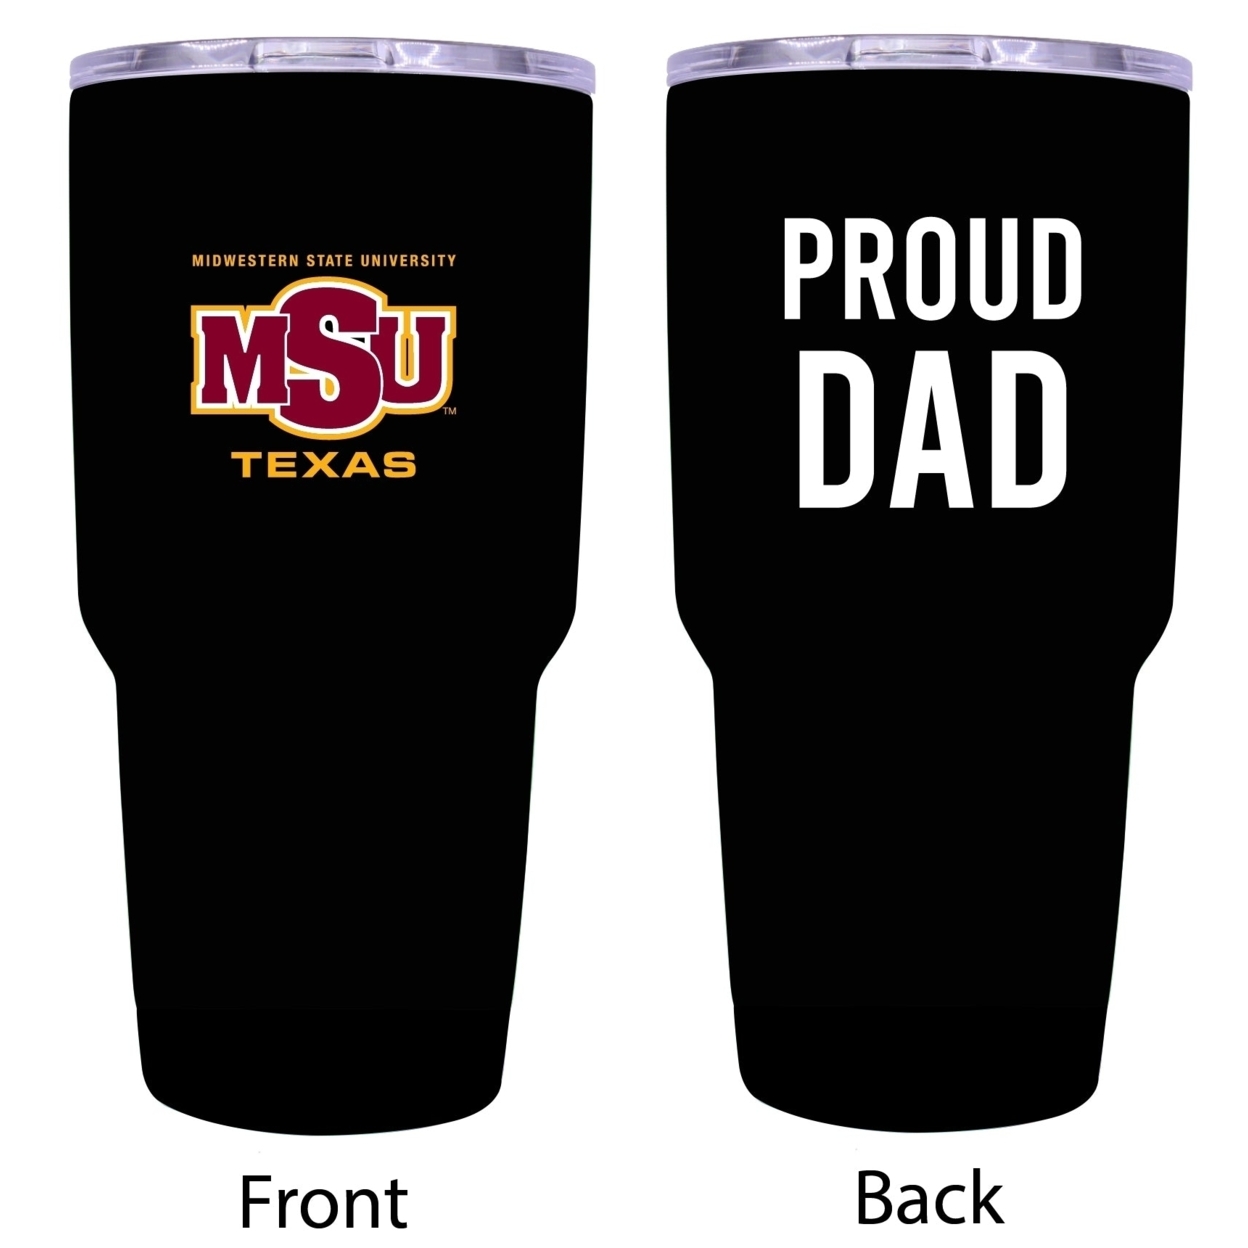 Midwestern State University Proud Dad Insulated Tumbler